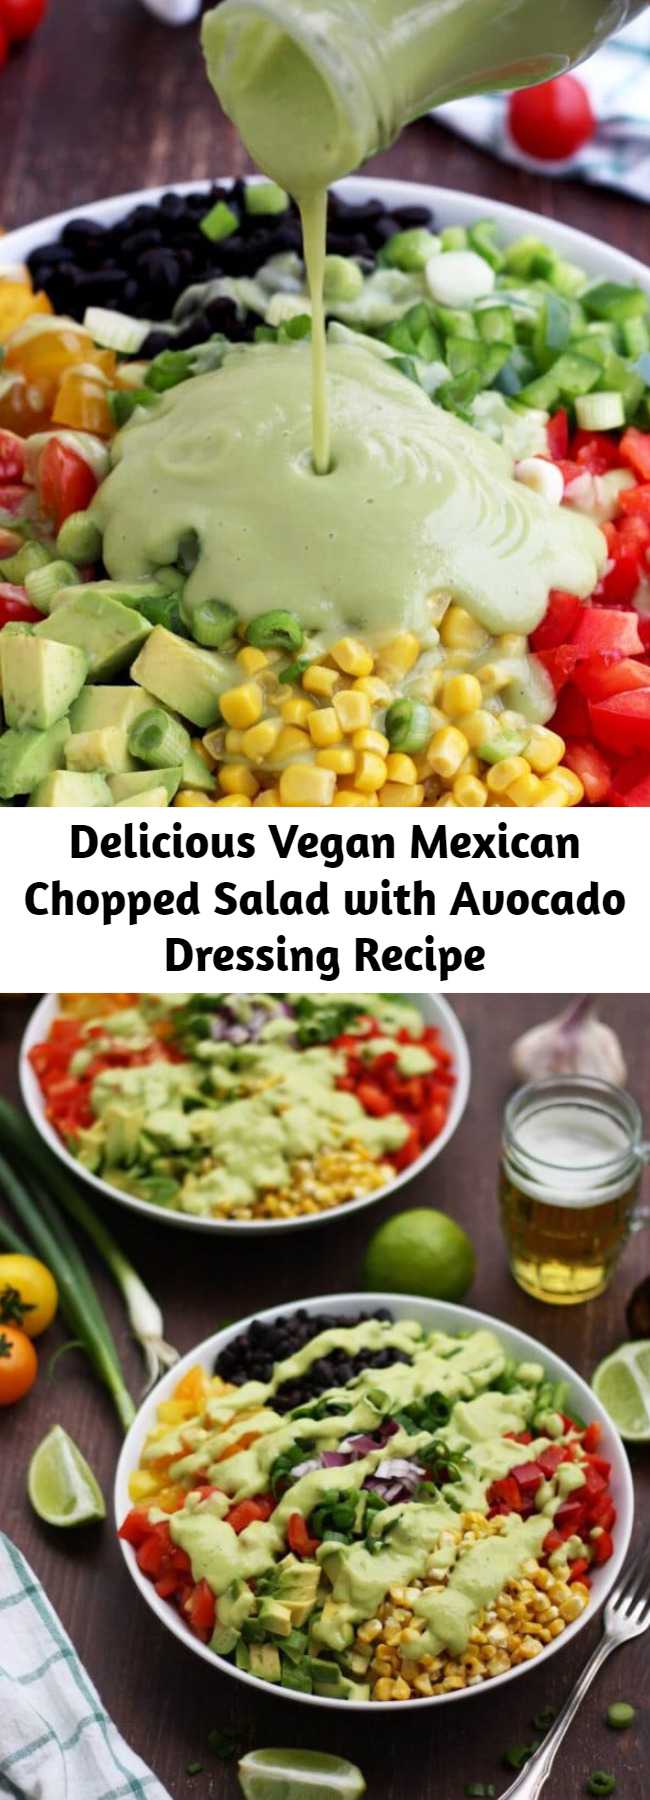 Delicious Vegan Mexican Chopped Salad with Avocado Dressing Recipe - Delicious vegan Mexican chopped salad with avocado dressing makes the perfect lunch salad or an easy side dish to any Mexican feast. This gluten free salad is packed with fresh veggies, dietary fiber and plant based protein.